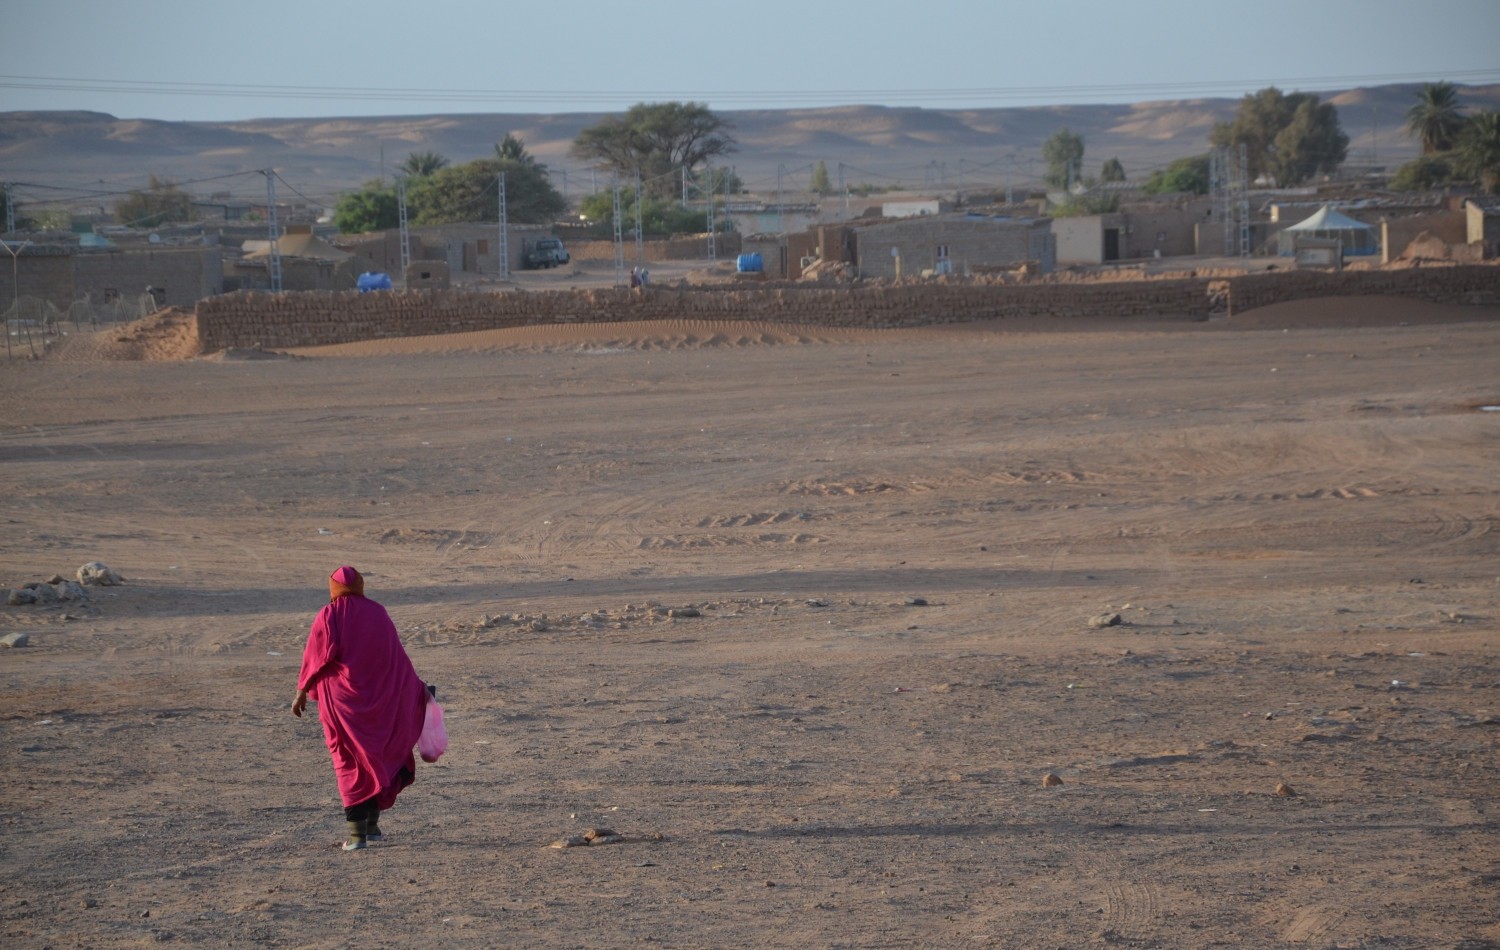 Malnutrition emergency in Sahrawi Camps; 75% reduction in fo ... Image 1